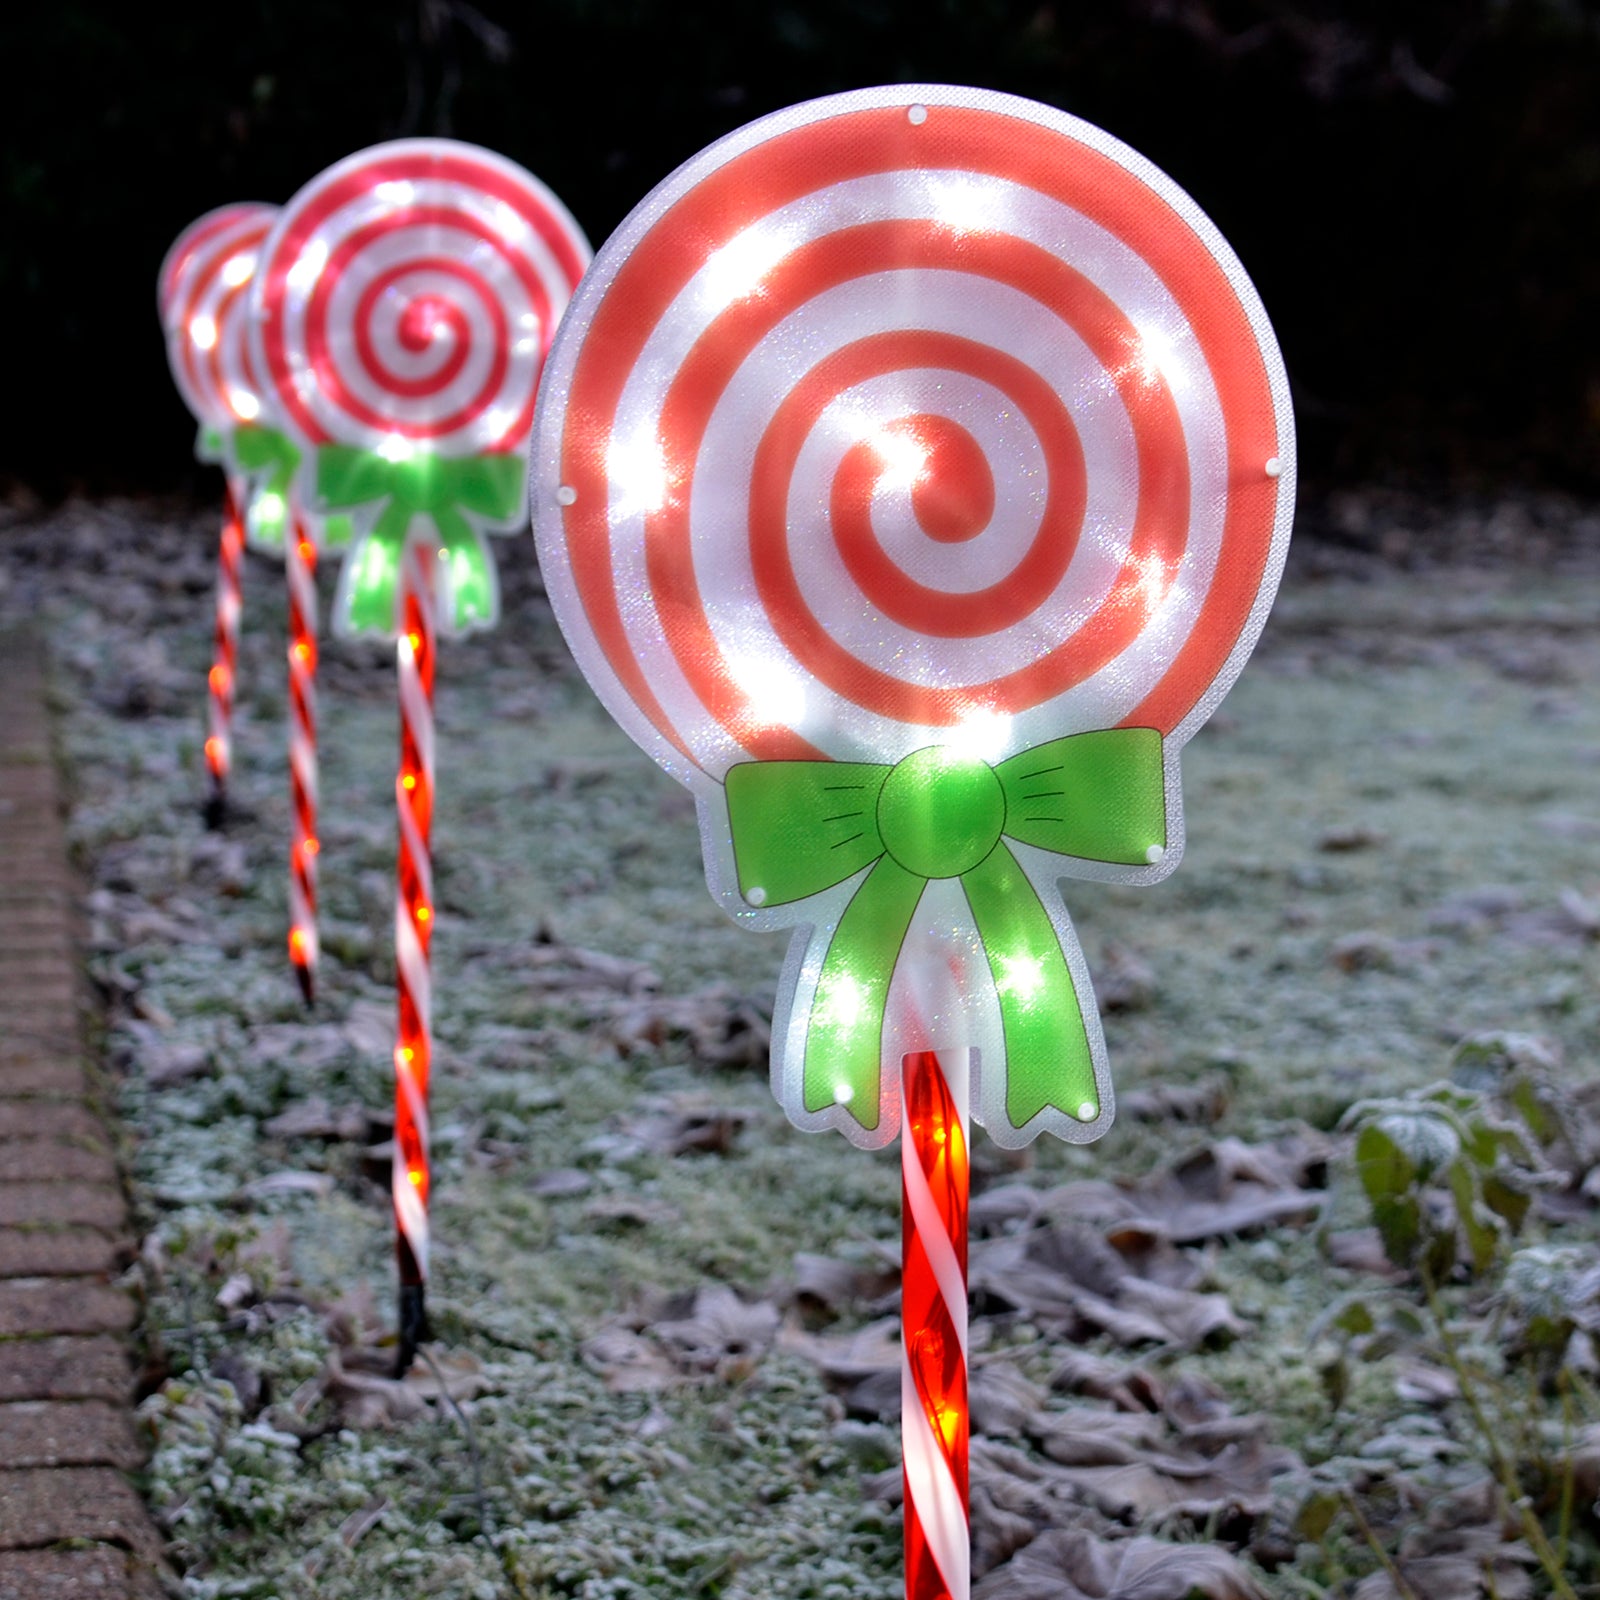 Christmas candy cane lollipop pathway lights lit up in a frosty garden